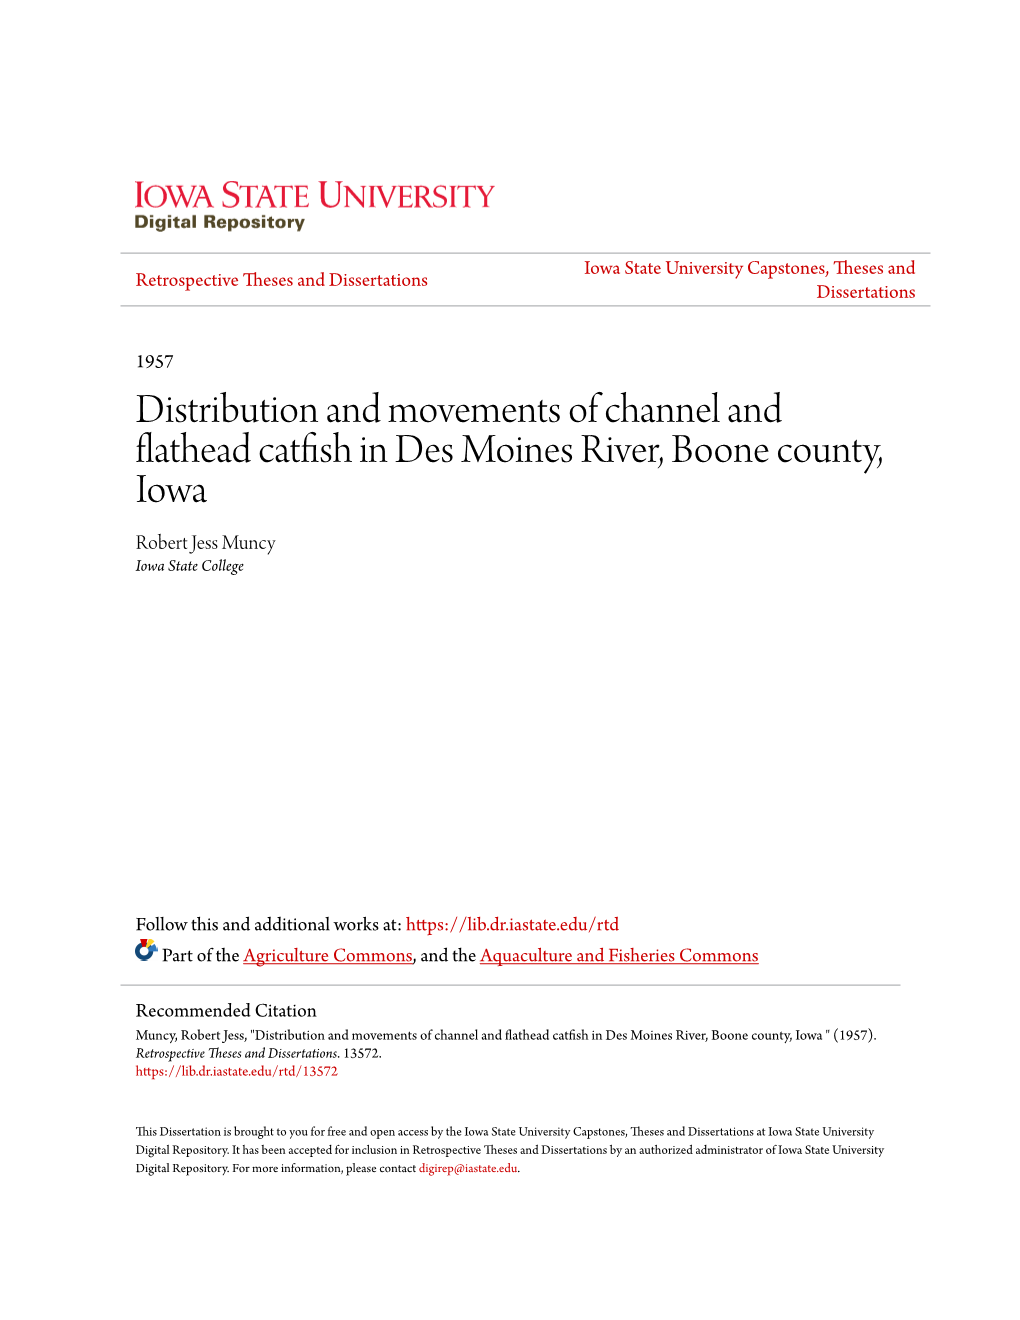 Distribution and Movements of Channel and Flathead Catfish in Des Moines River, Boone County, Iowa Robert Jess Muncy Iowa State College